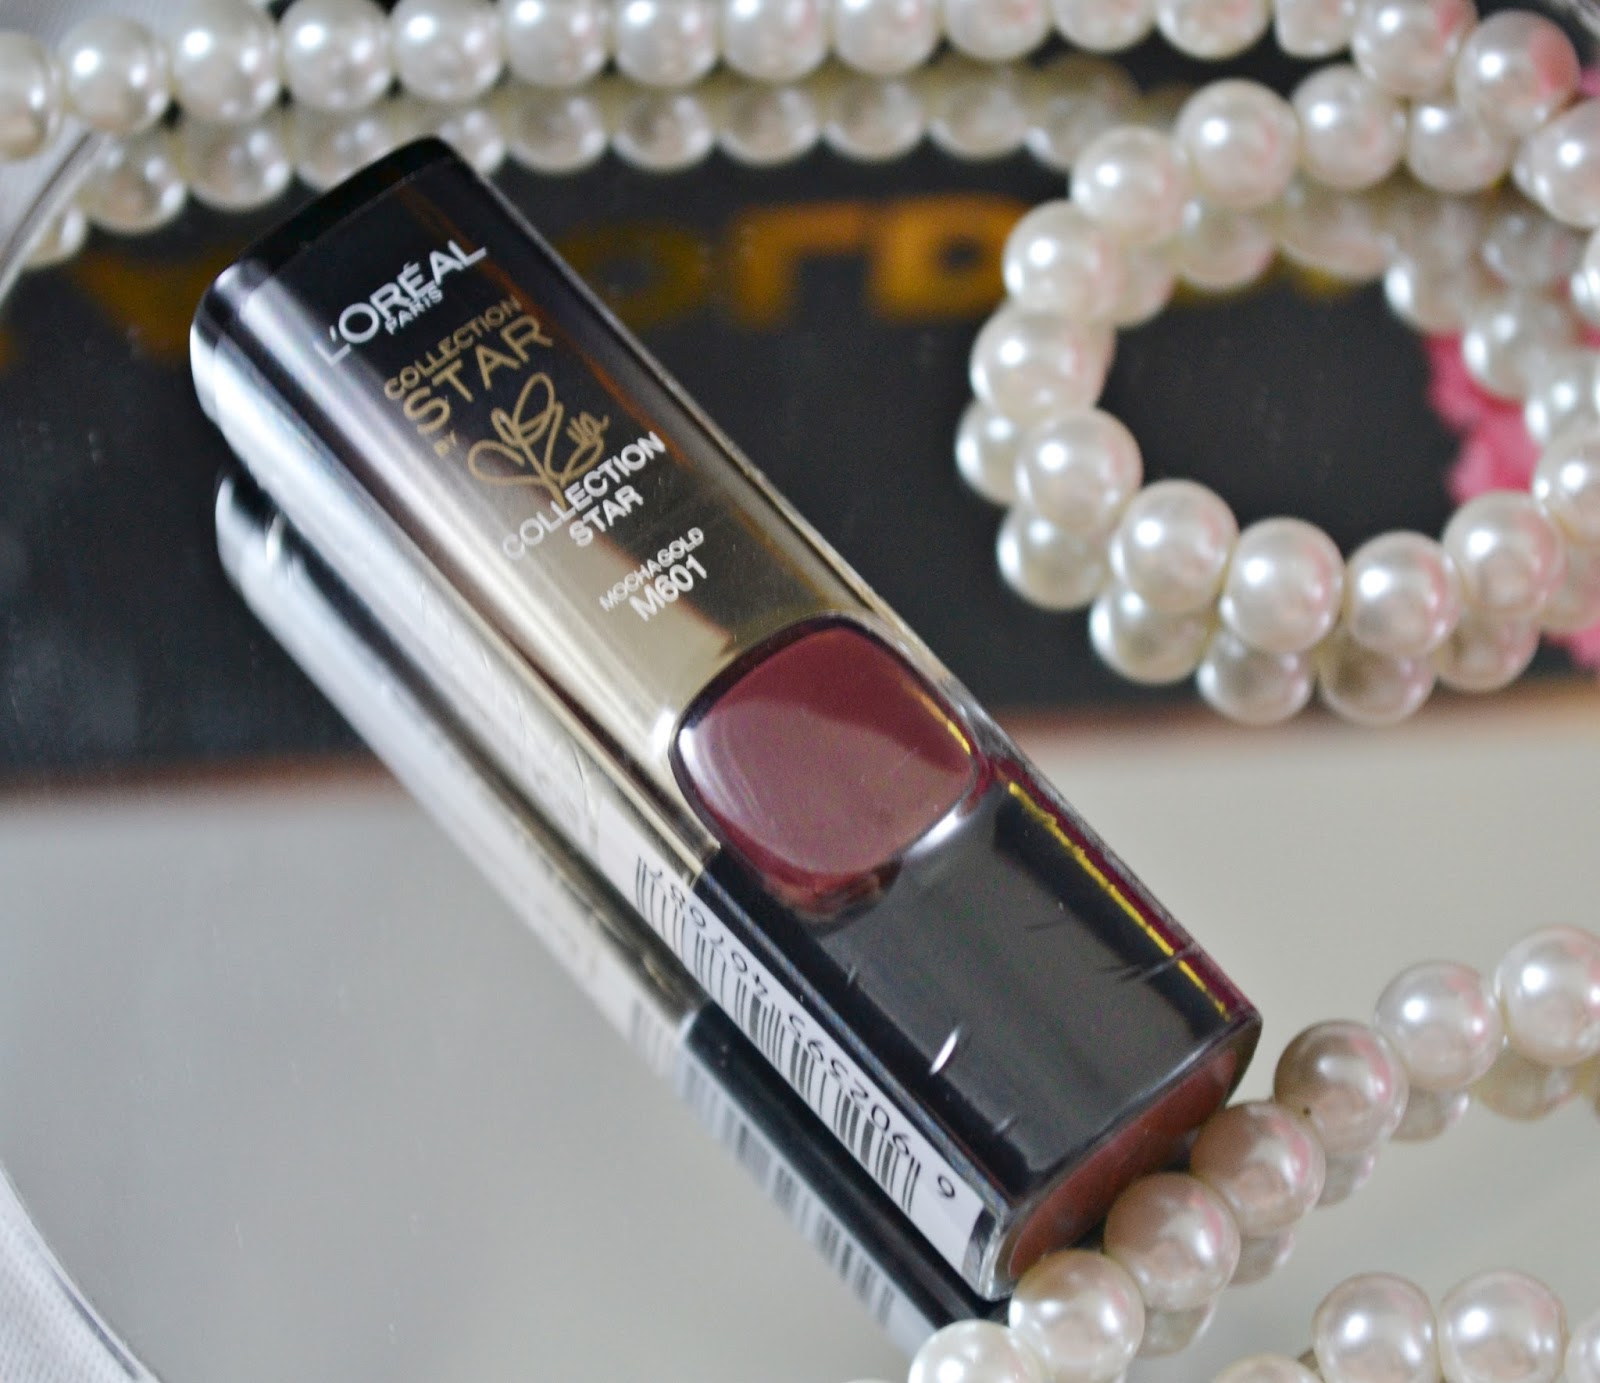 Product review: L'Oreal's color riche gold obsession in mocha gol...